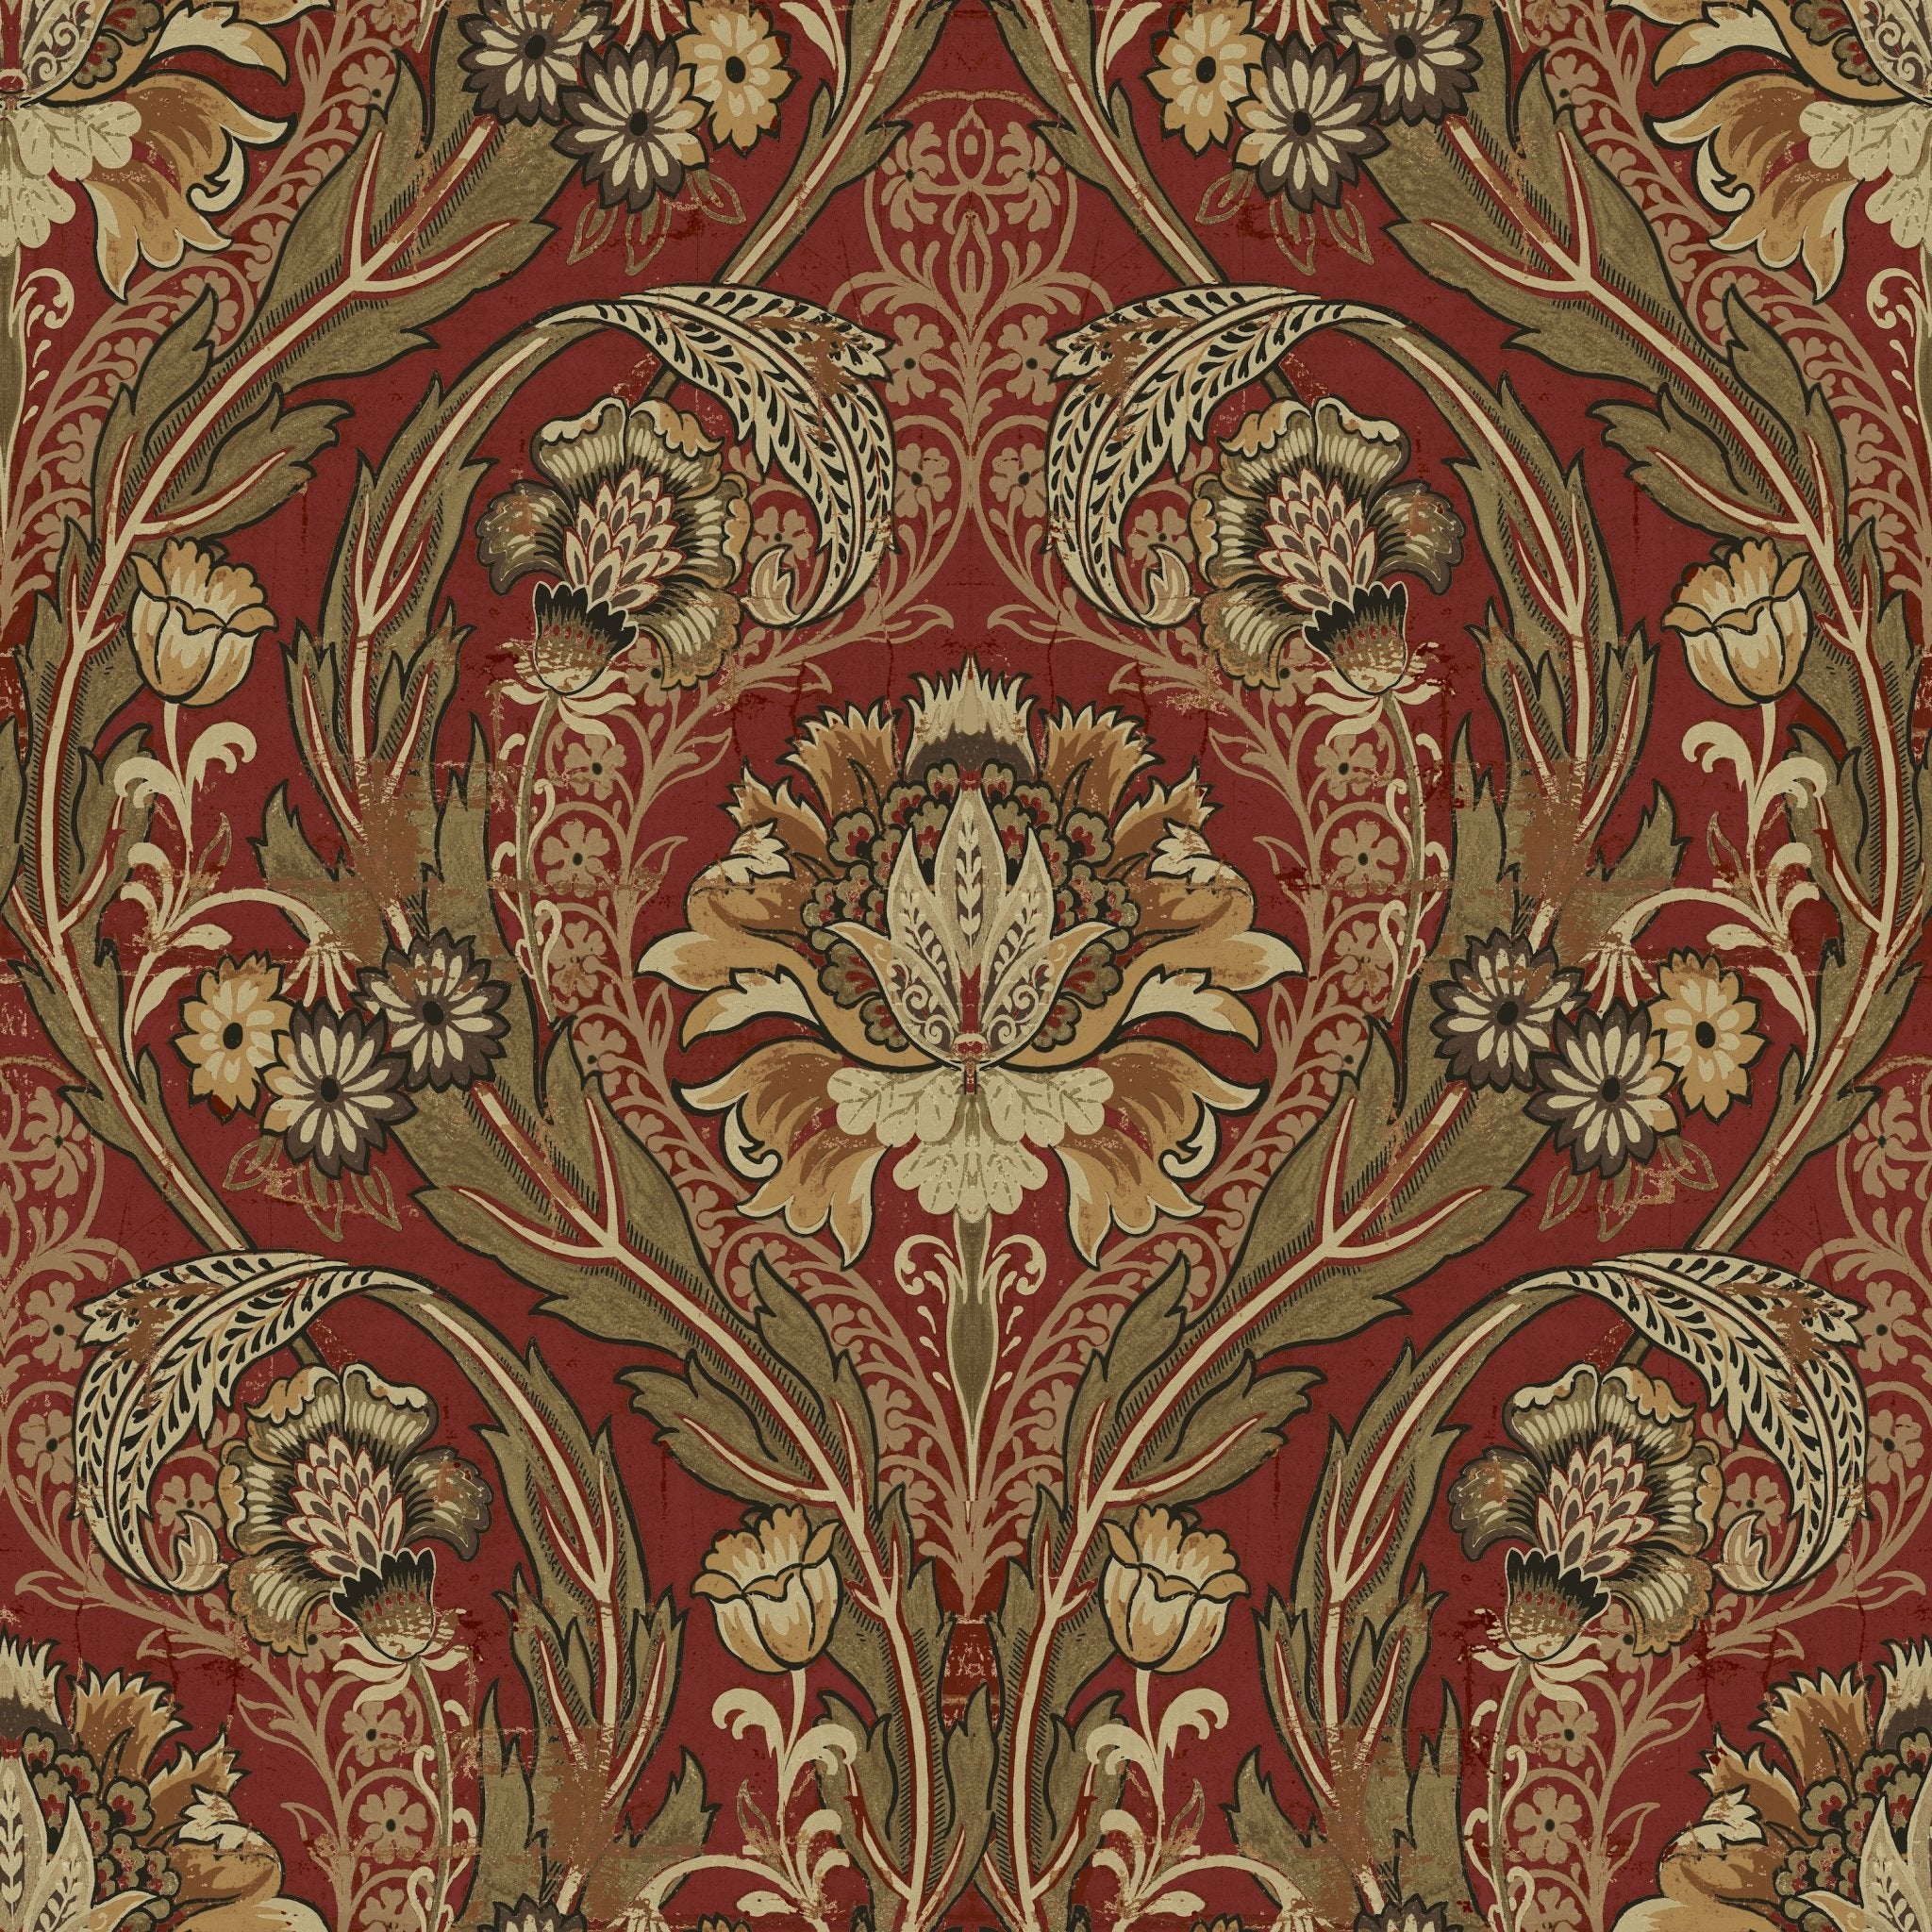 Wallpaper ID 1762105  ornate antique red decoration pattern no  people nightlife night retro styled design event elegance indoors  victorian style good dark celebration free download